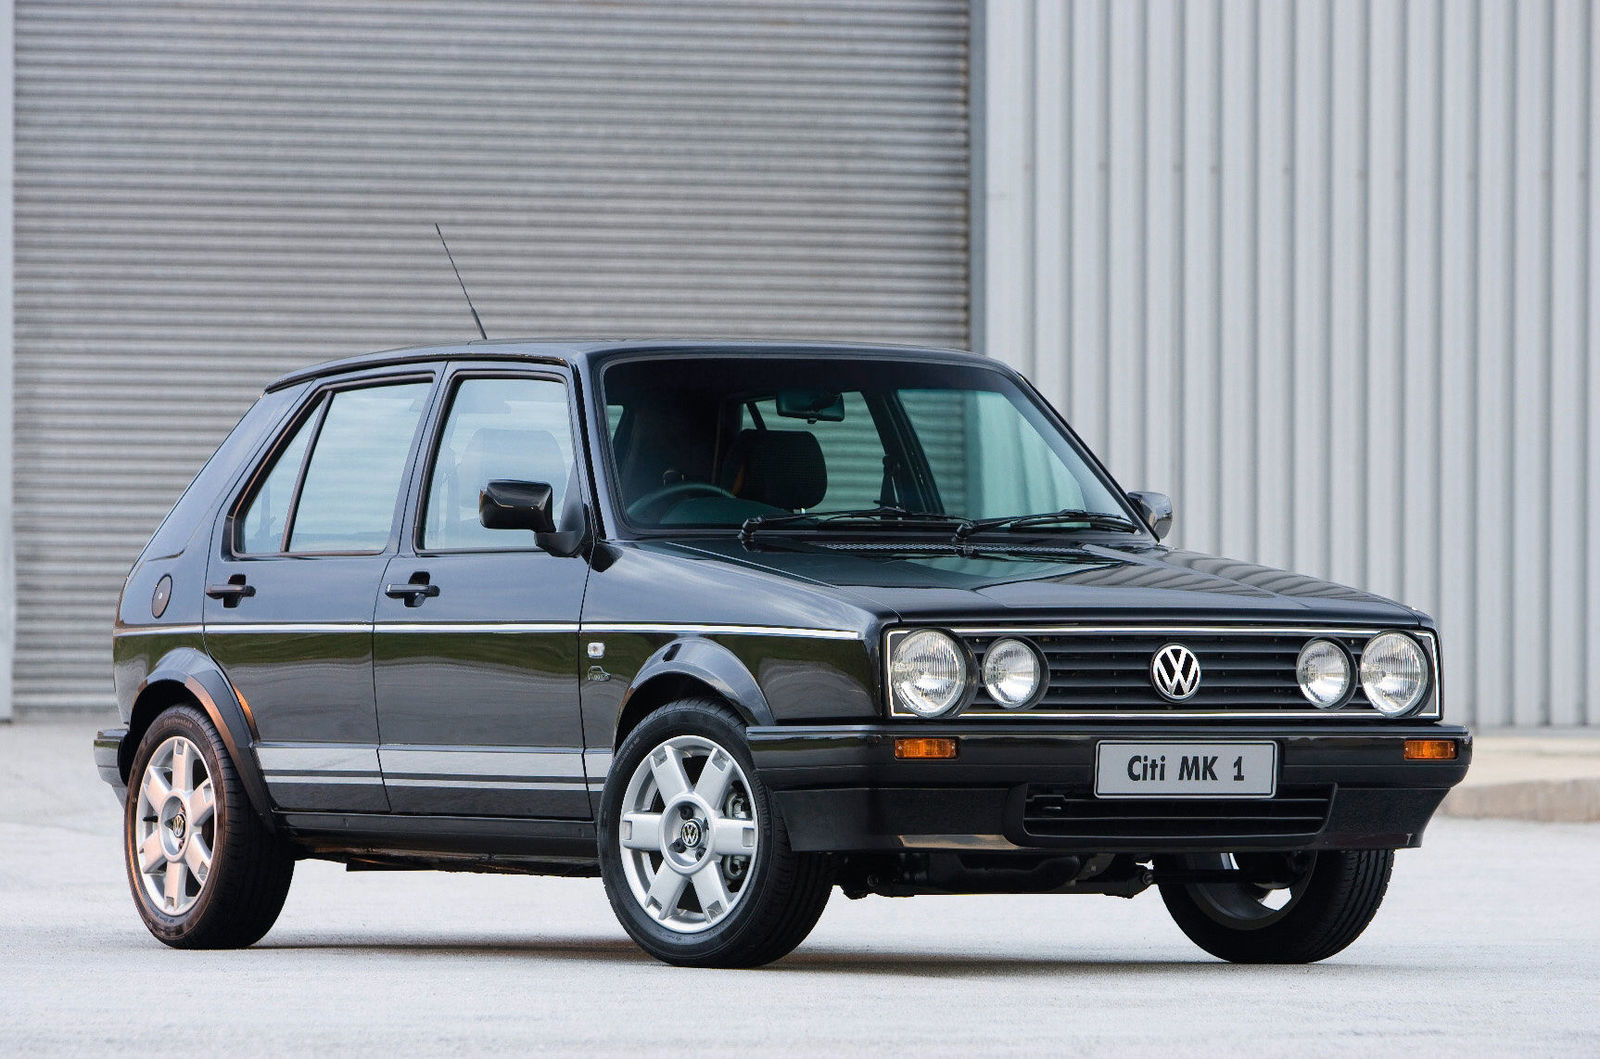 Volkwagen Citi Mk1 Limited Edition (South Africa)